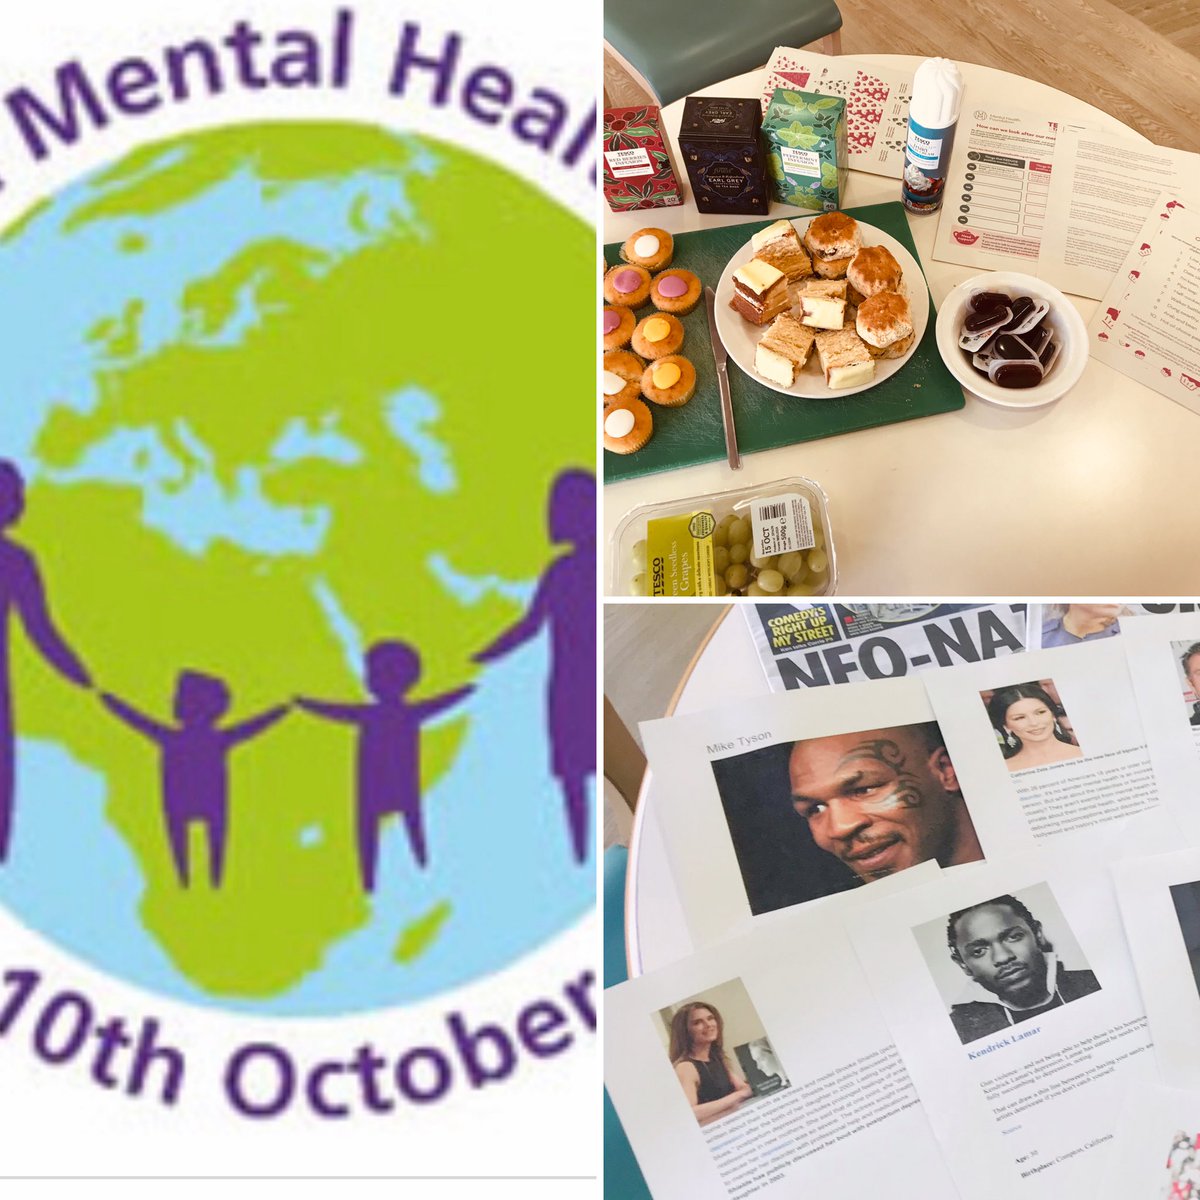 Down here on Isherwood ward we are recognising that it is  World Mental Health Day by  “Tea & Talk” we have lots of info from sportsmen/women  to singers to actors who have suffered from, mental health issues, talking really does help ⁦@GMMH_NHS⁩ ⁦@WMHDay⁩ #teaandtalk